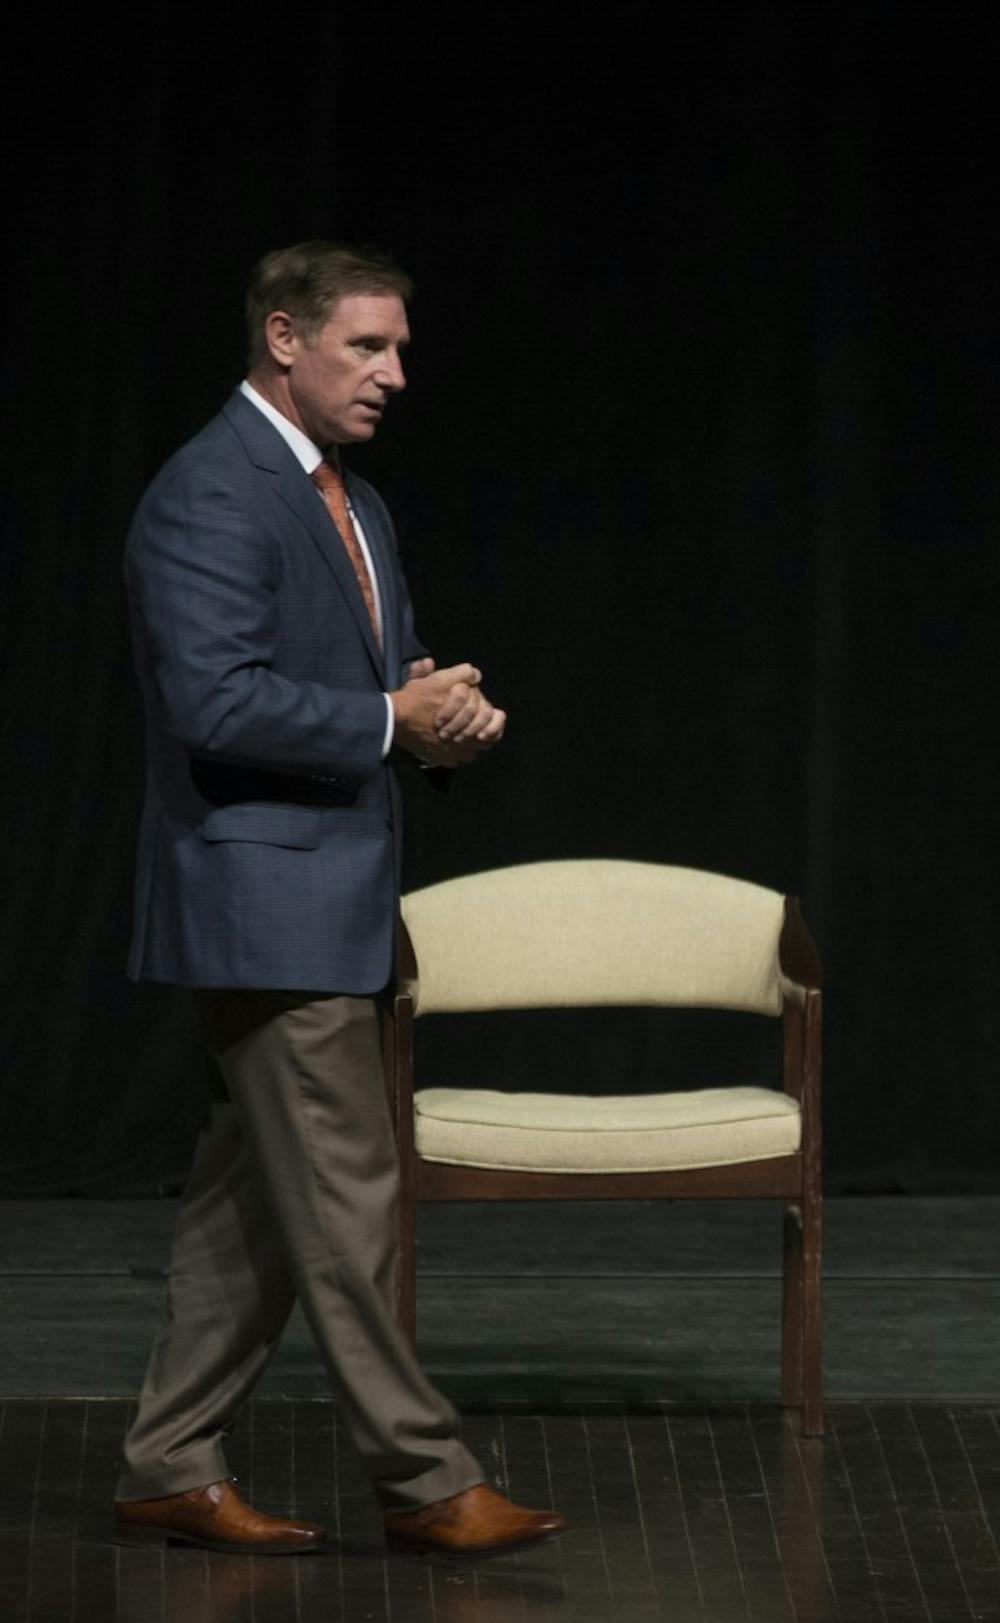 <p>Kevin Briggs speaks to the audience on Sept. 14 at John R. Emens Auditorium. Briggs spoke about the experiences he had while patrolling the Golden Gate Bridge during his time as an officer and a sergeant. <em>DN PHOTO SAMANTHA BRAMMER</em></p>